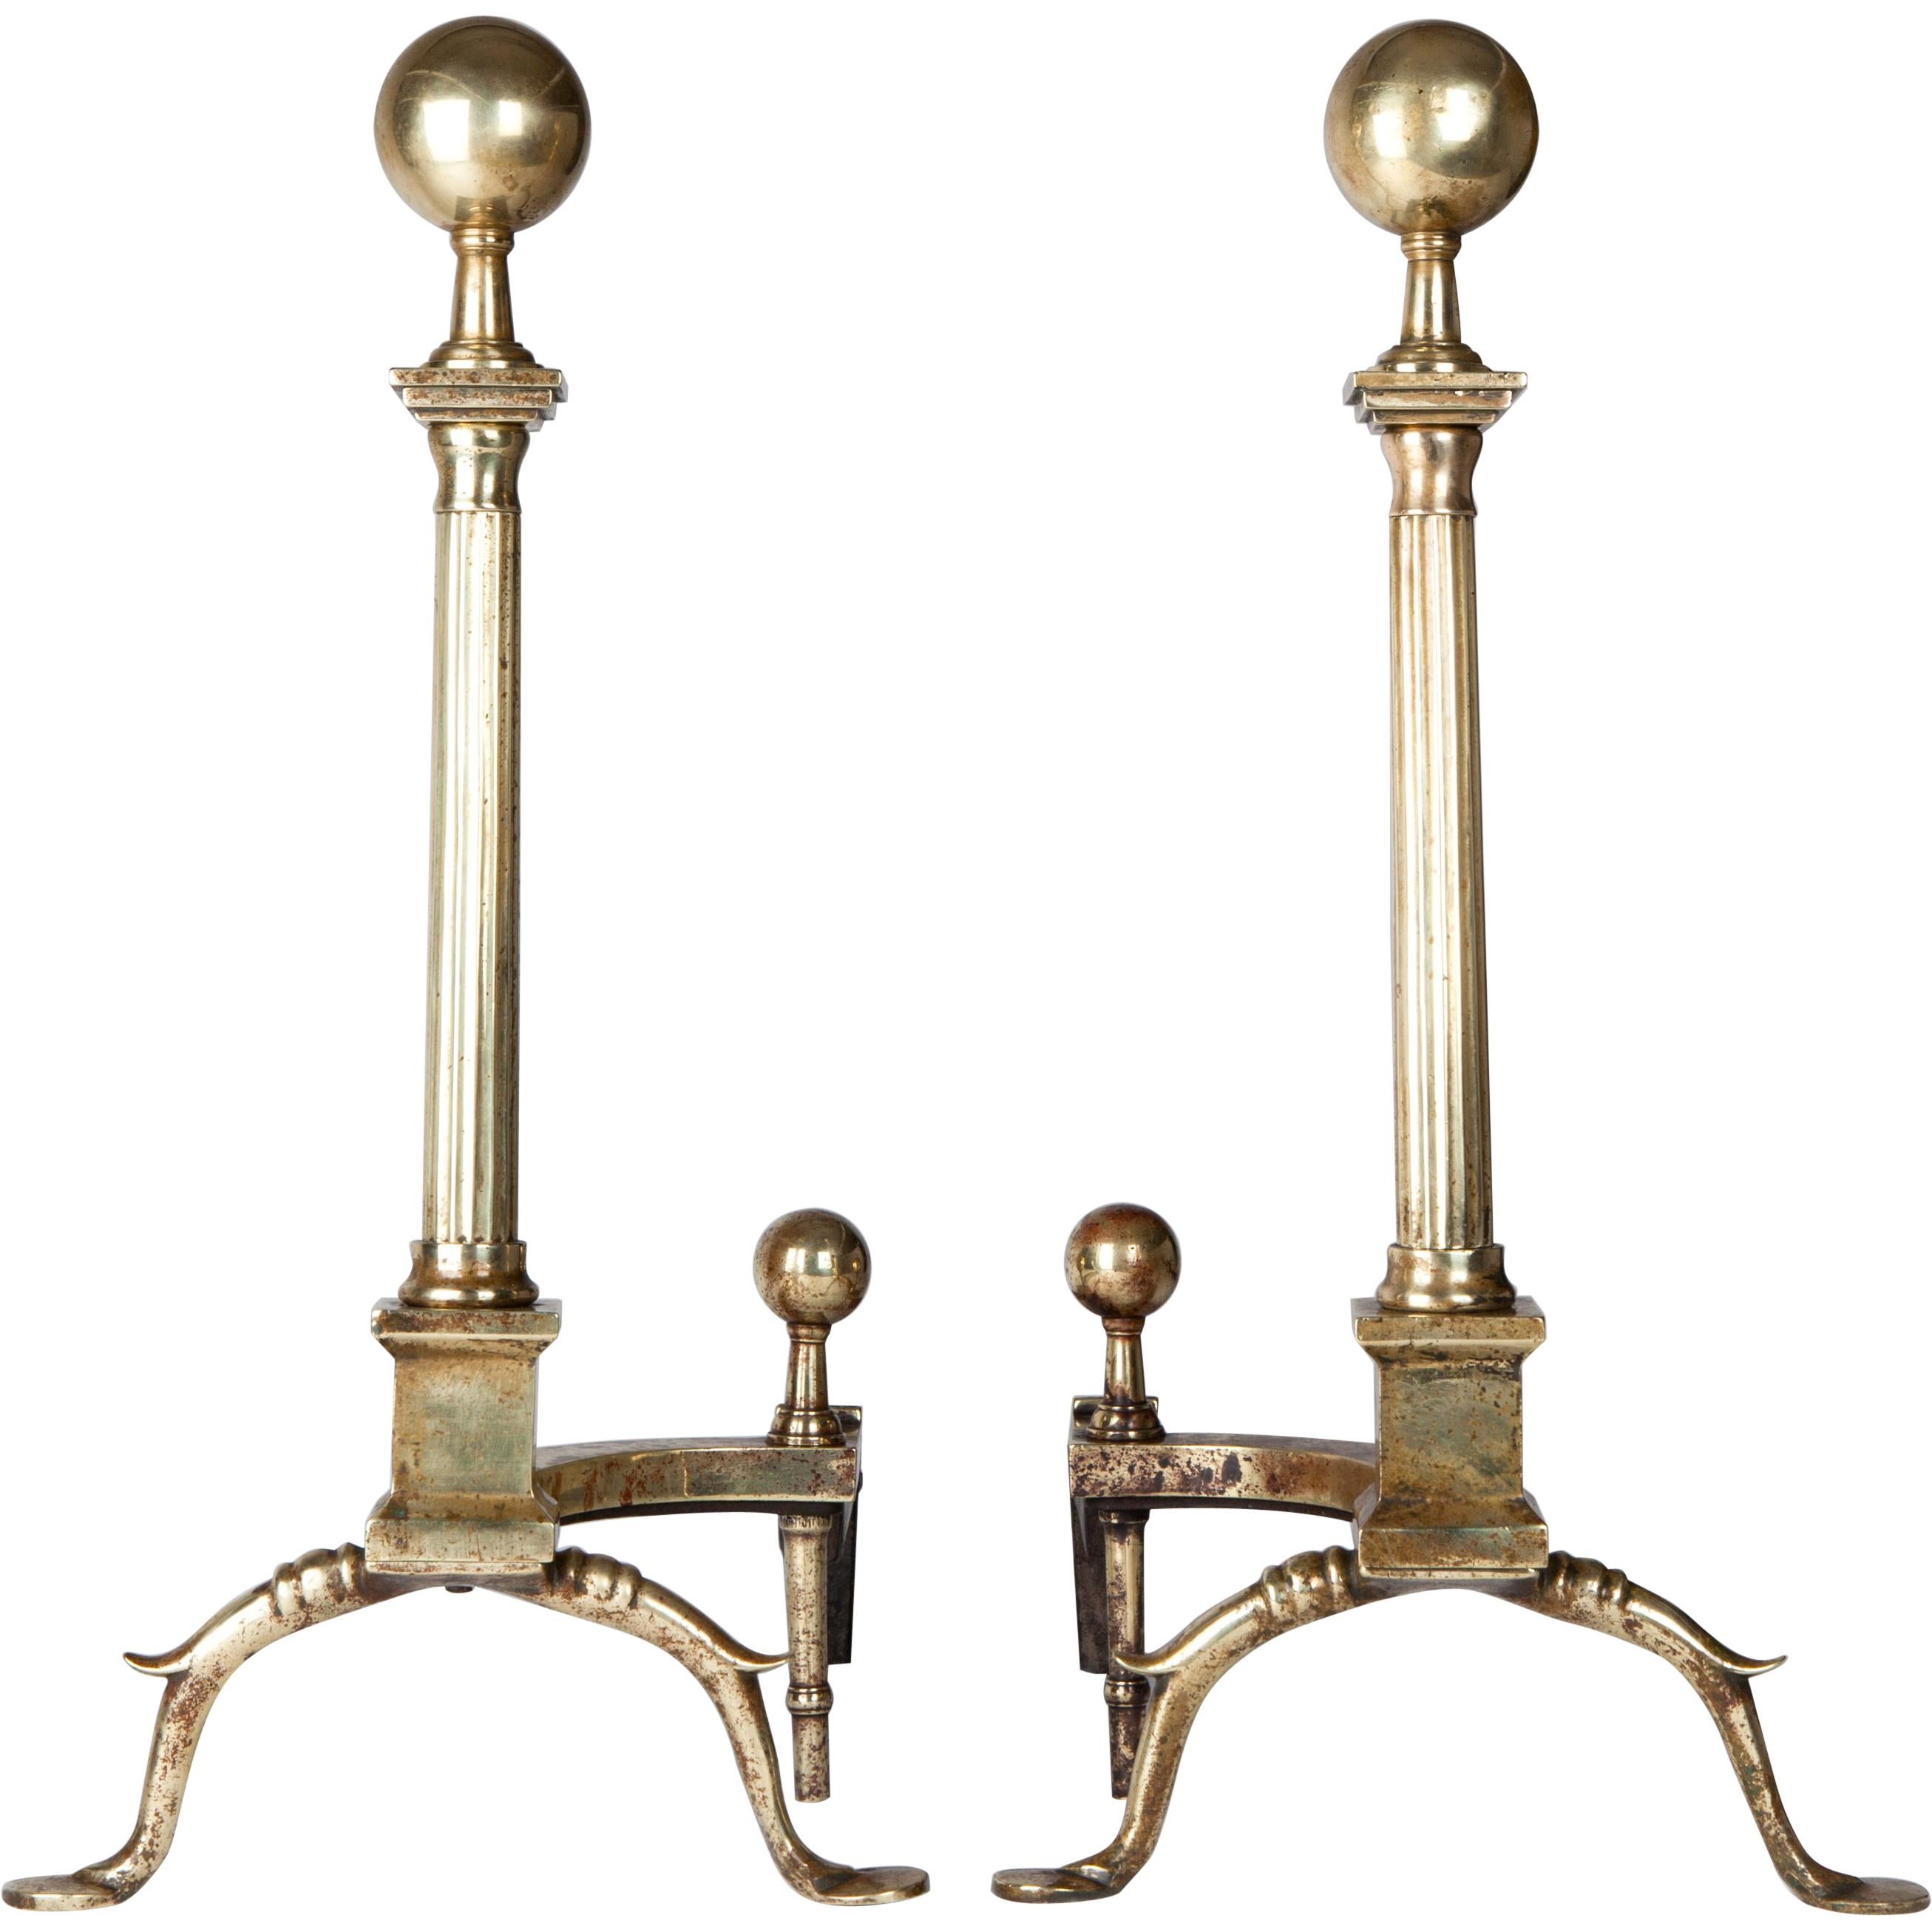 Early 20th Century Neoclassical Polished Brass Andirons With Fluted Columns For Sale